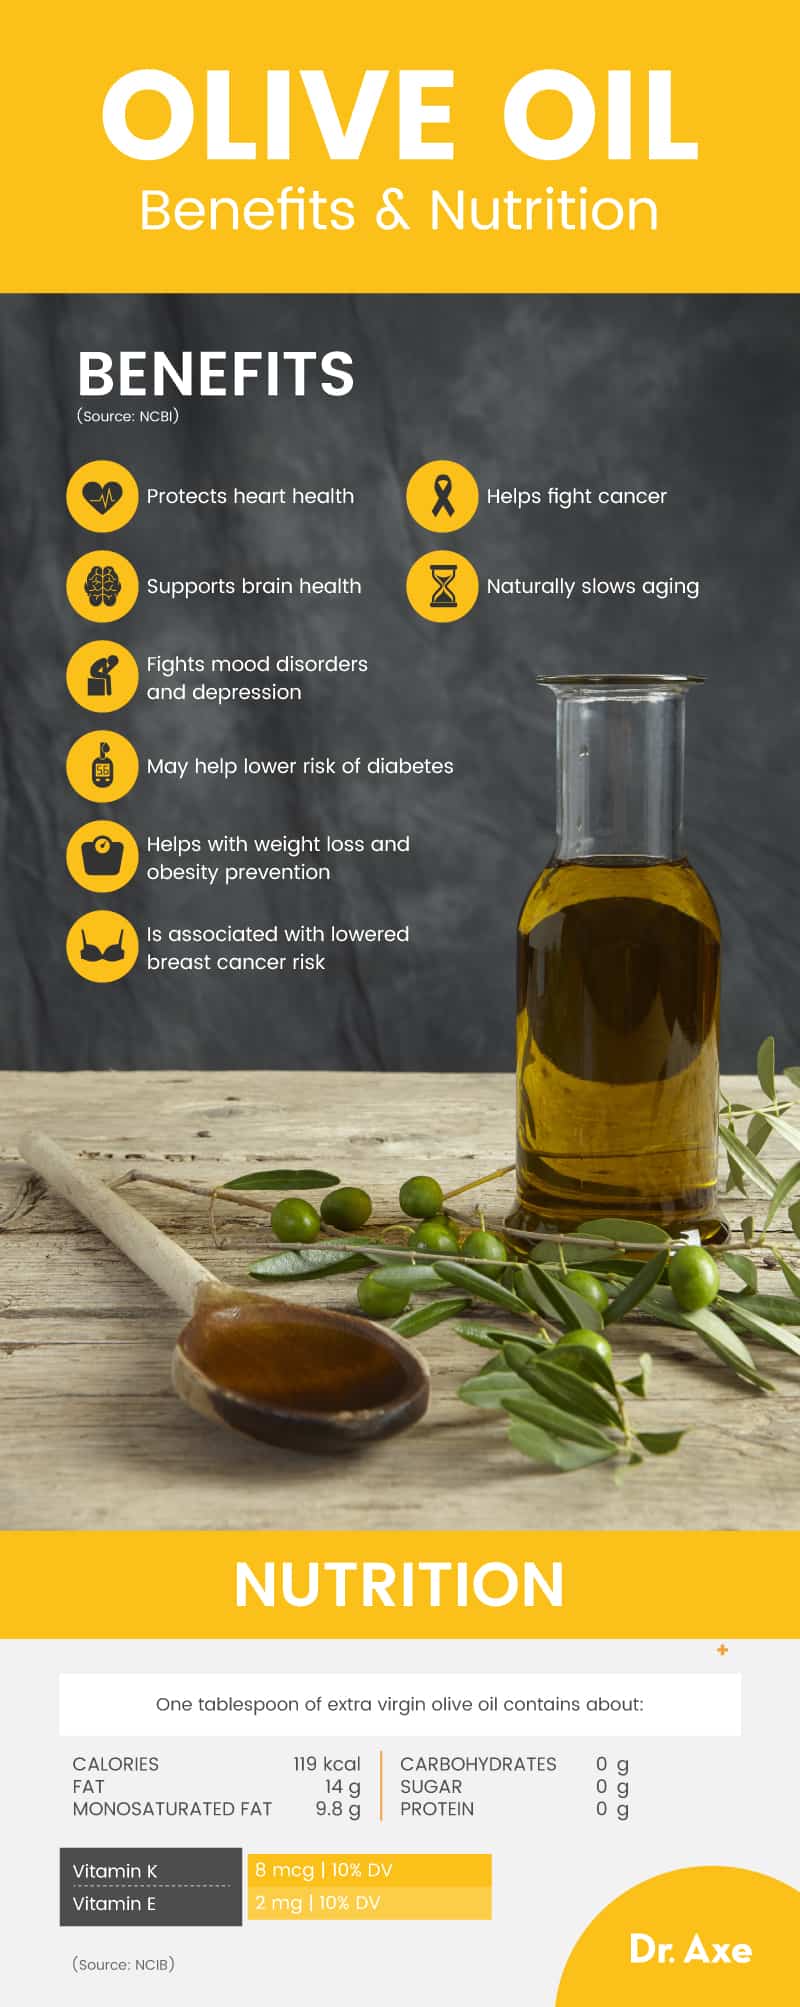 Benefit of olive oil